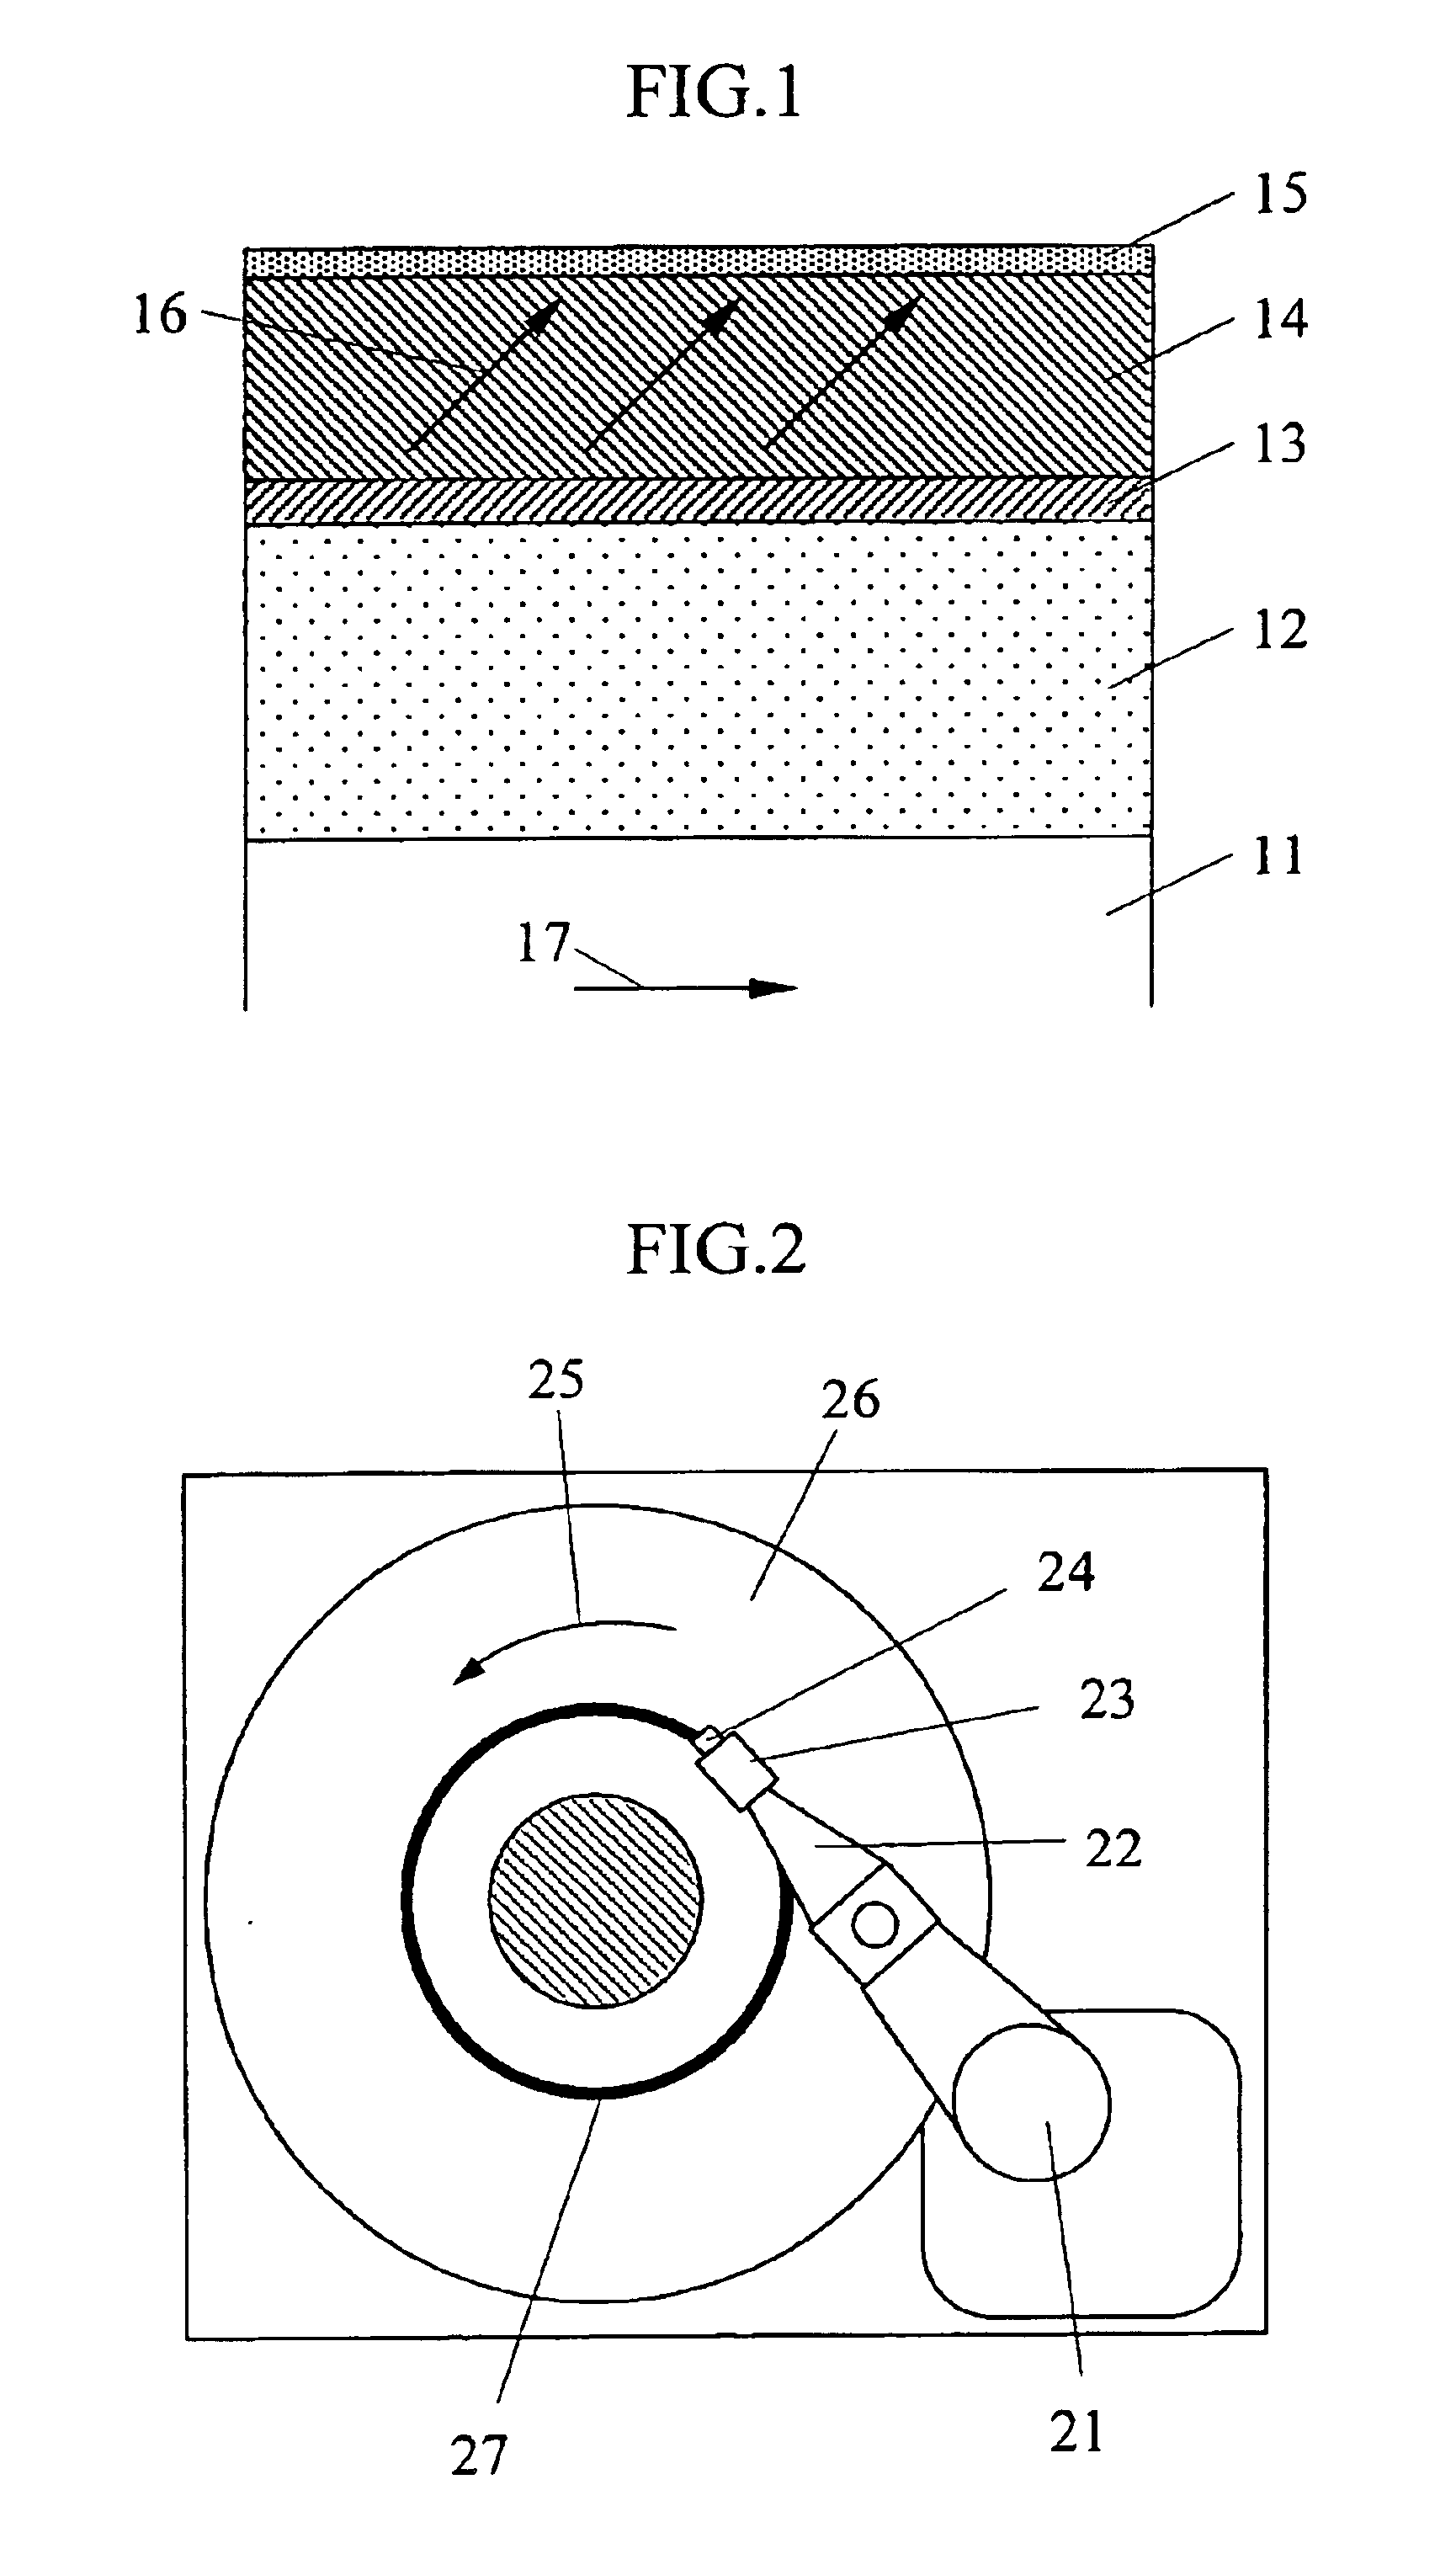 Magnetic recording medium, magnetic recording apparatus using the same, and method and apparatus for manufacturing the magnetic recording medium